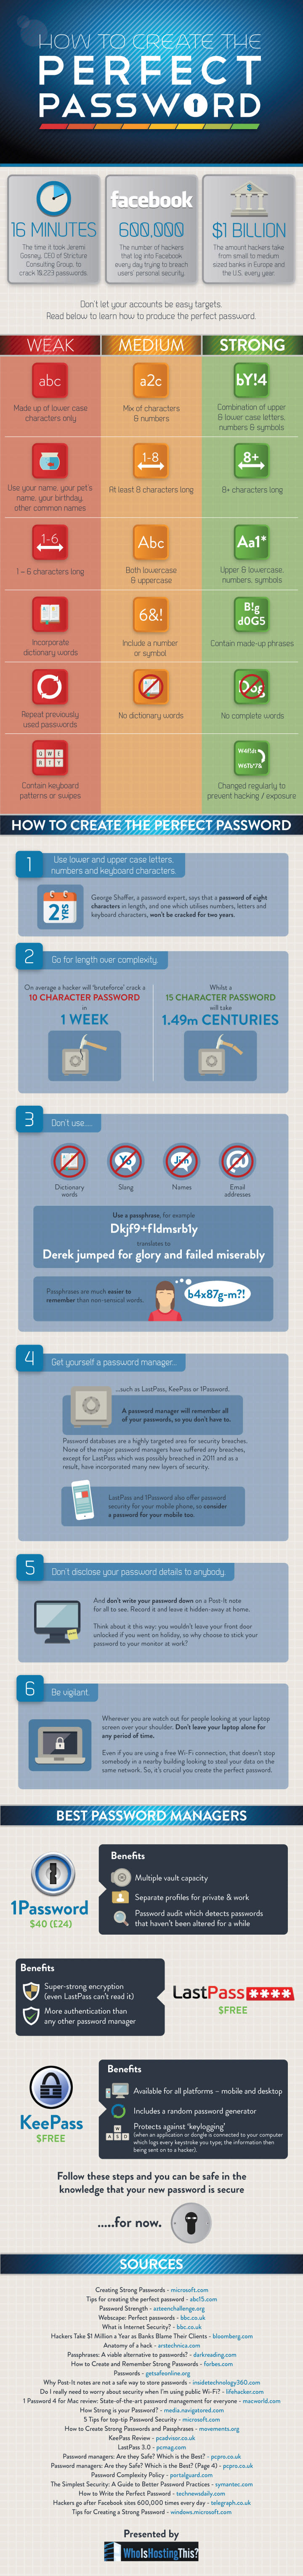 How to Create a Super Strong Password (Infographic)